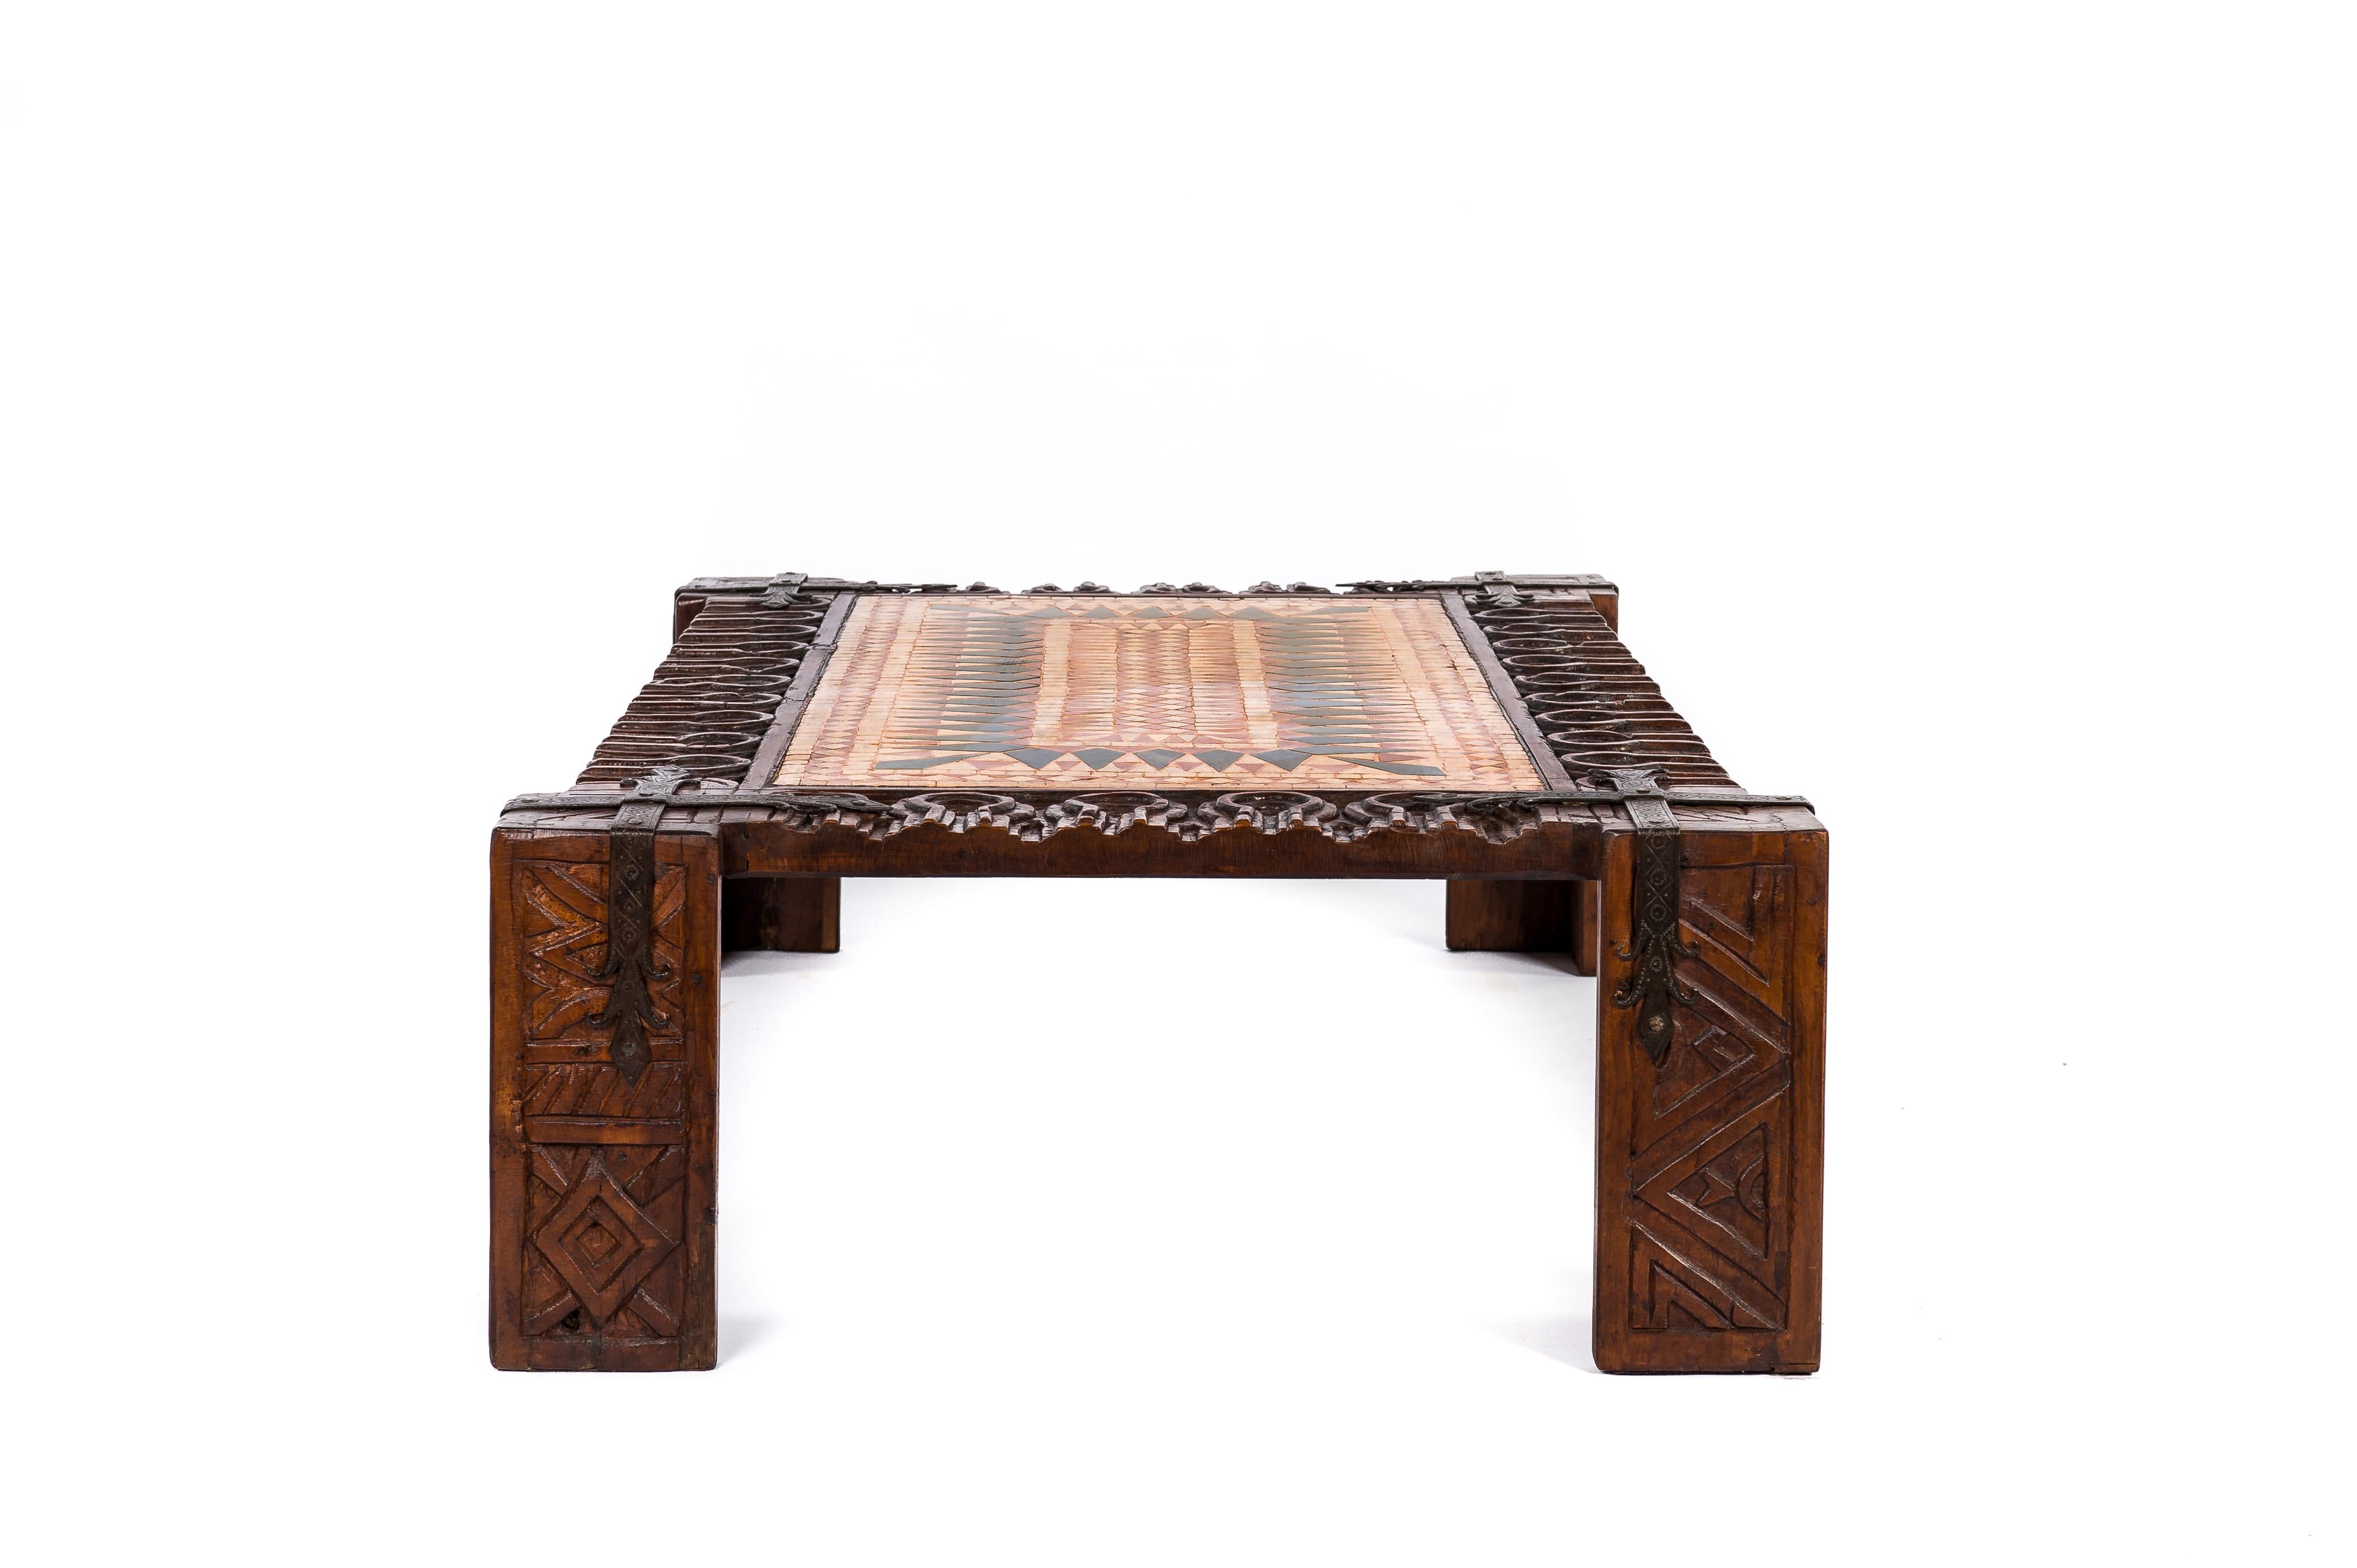 Polished Mid-Century Spanish Chestnut Hand-Carved Coffee Table with Geometric Tile Panel